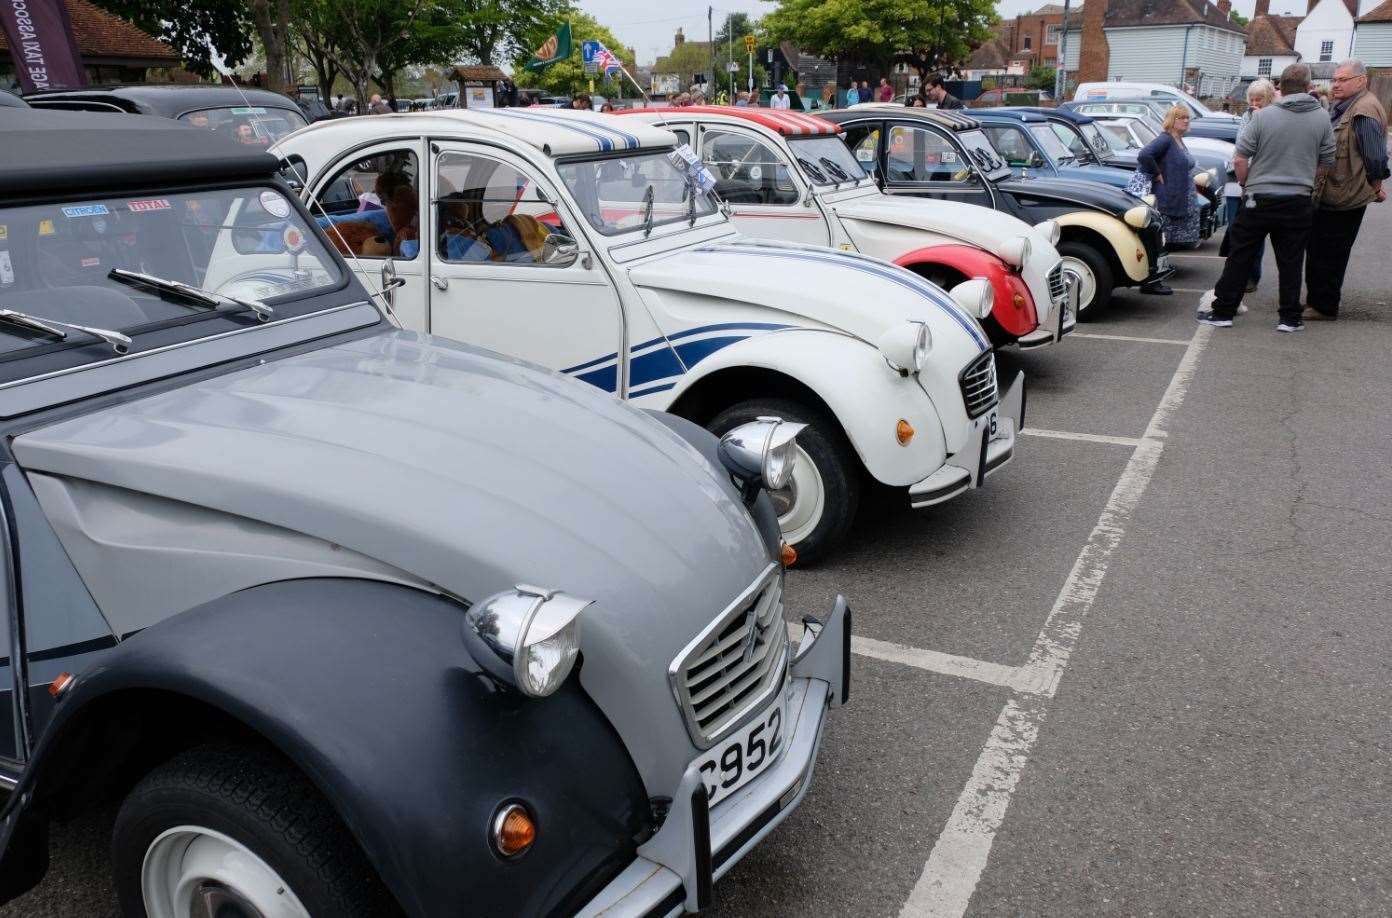 Cars from past decades, as well as up-and-coming electric vehicles, will line the streets of Faversham. Picture: James Adley